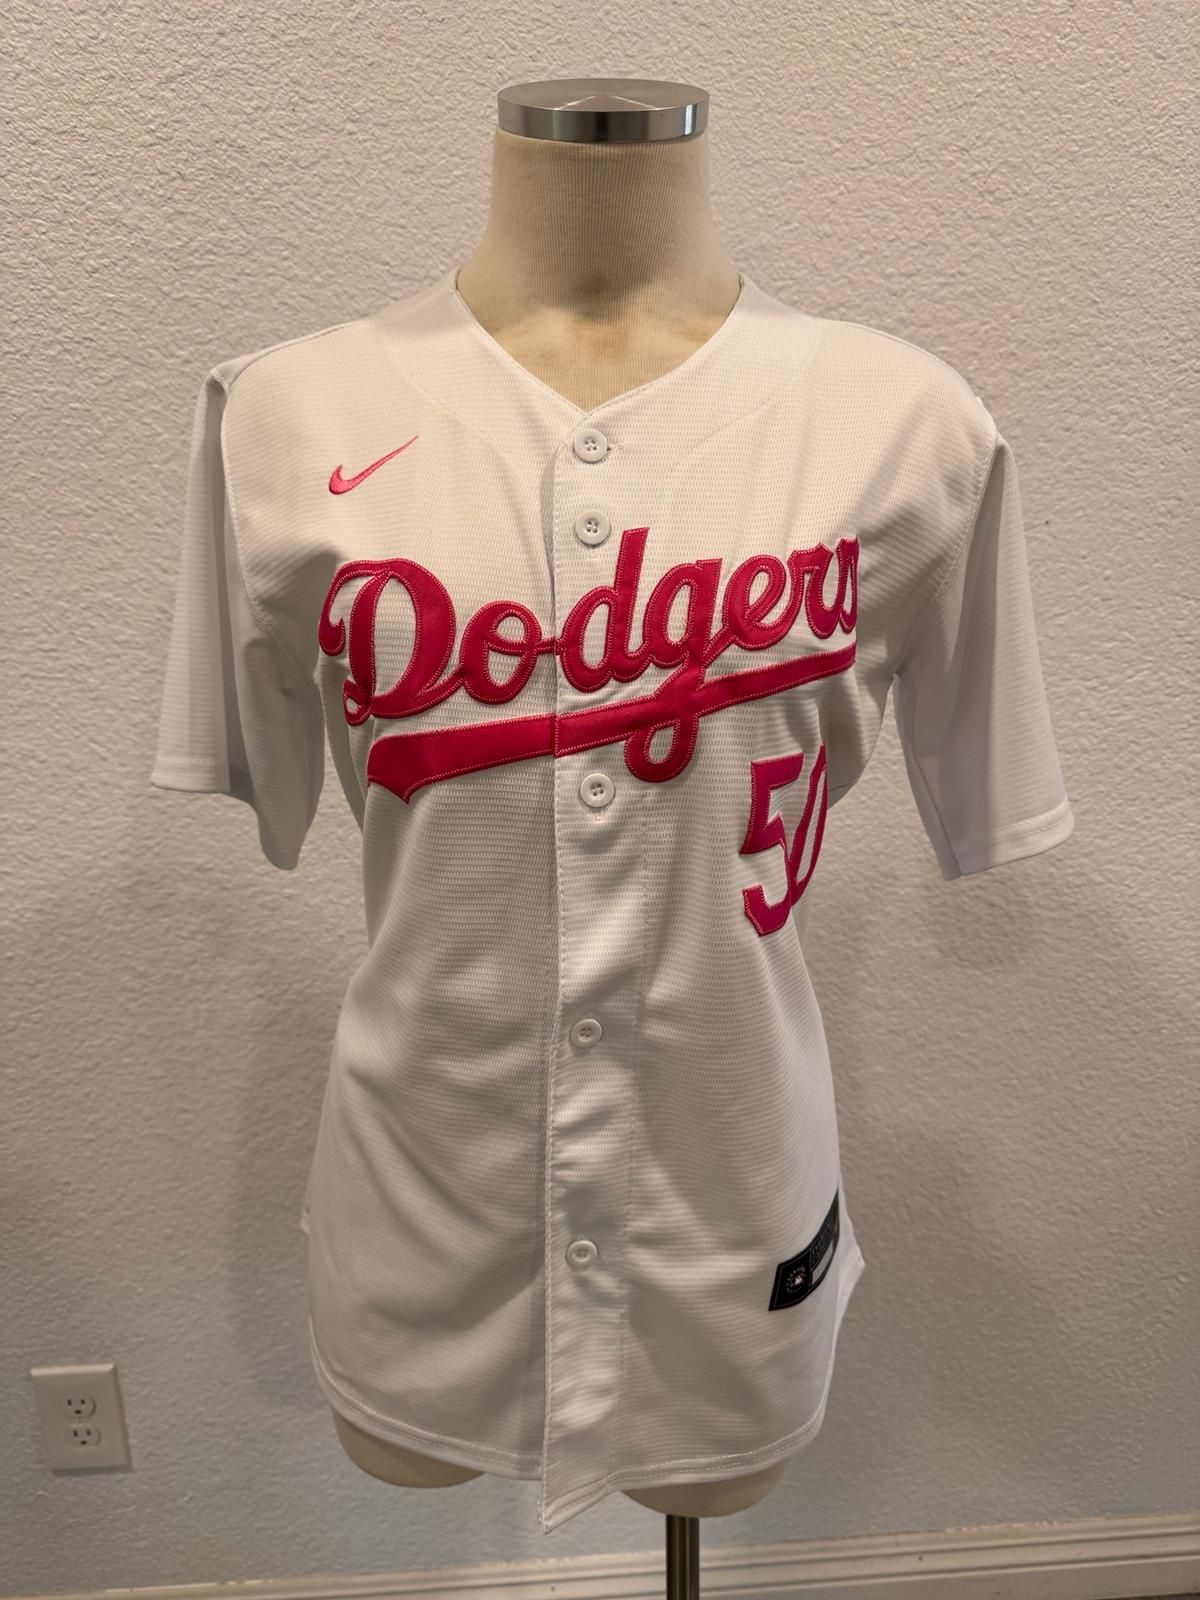 Women’s Mookie Betts #50 Los Angeles Dodgers Stitched White /pink  Jersey